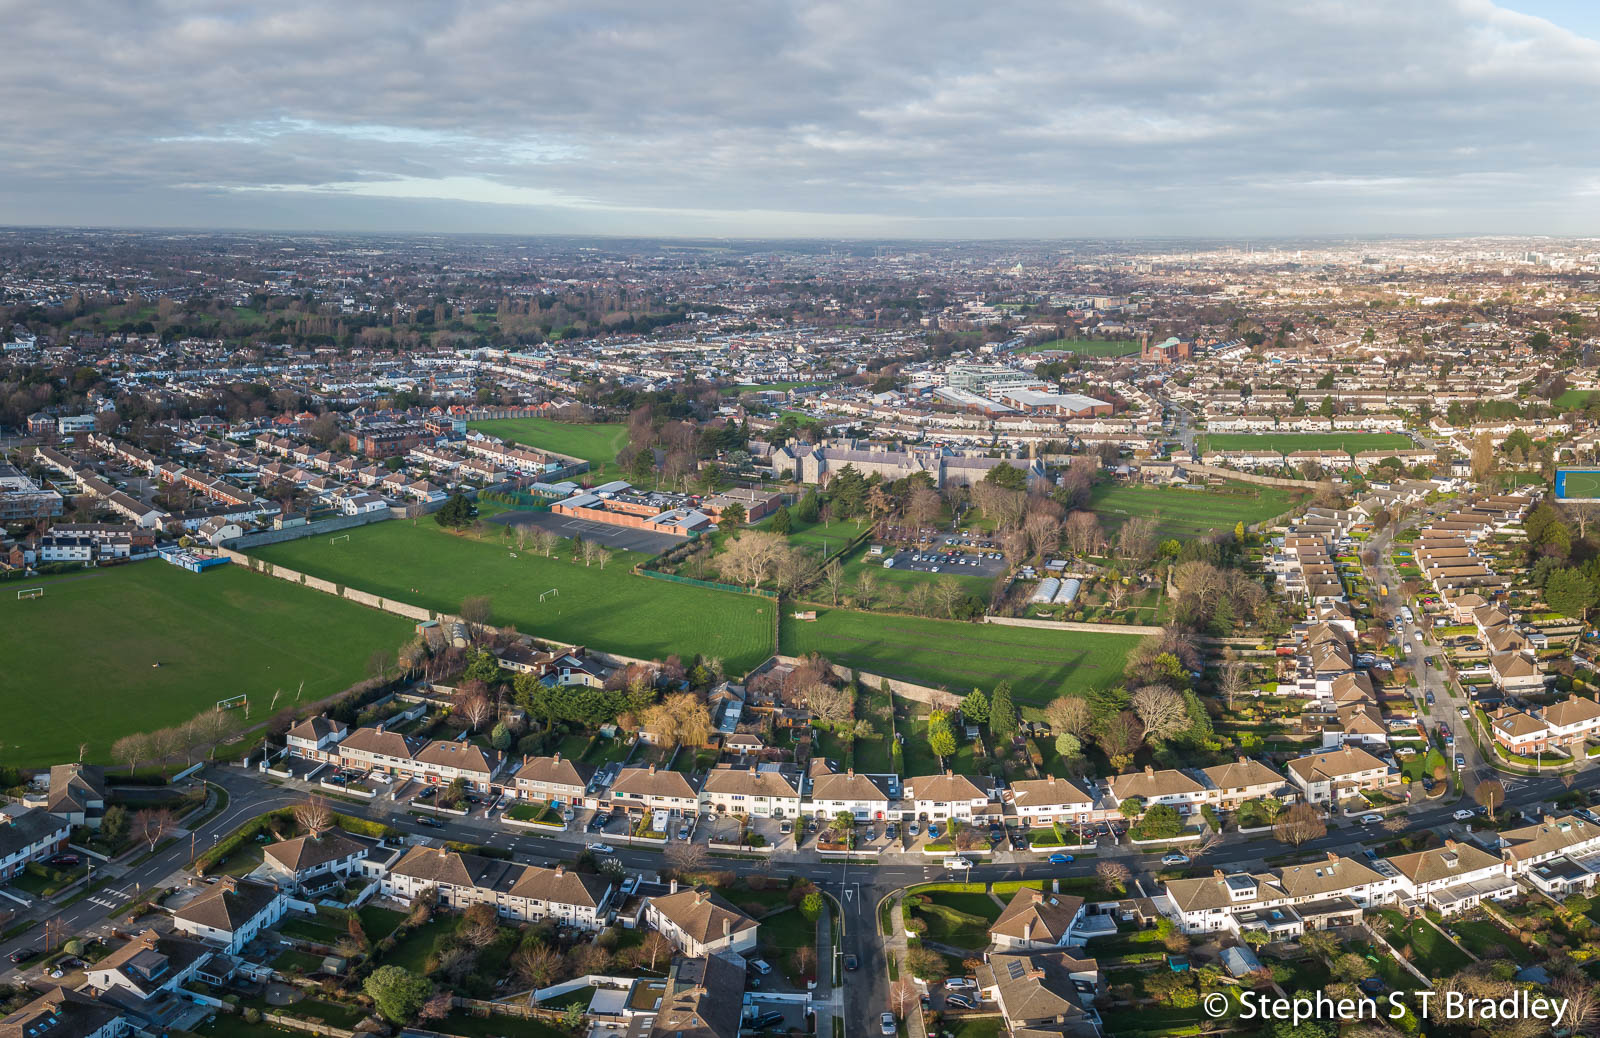 Aerial drone photography and video production services Dublin and Ireland portfolio - commercial aerial photography of the Dundrum suburb of Dublin Ireland. Photo 4